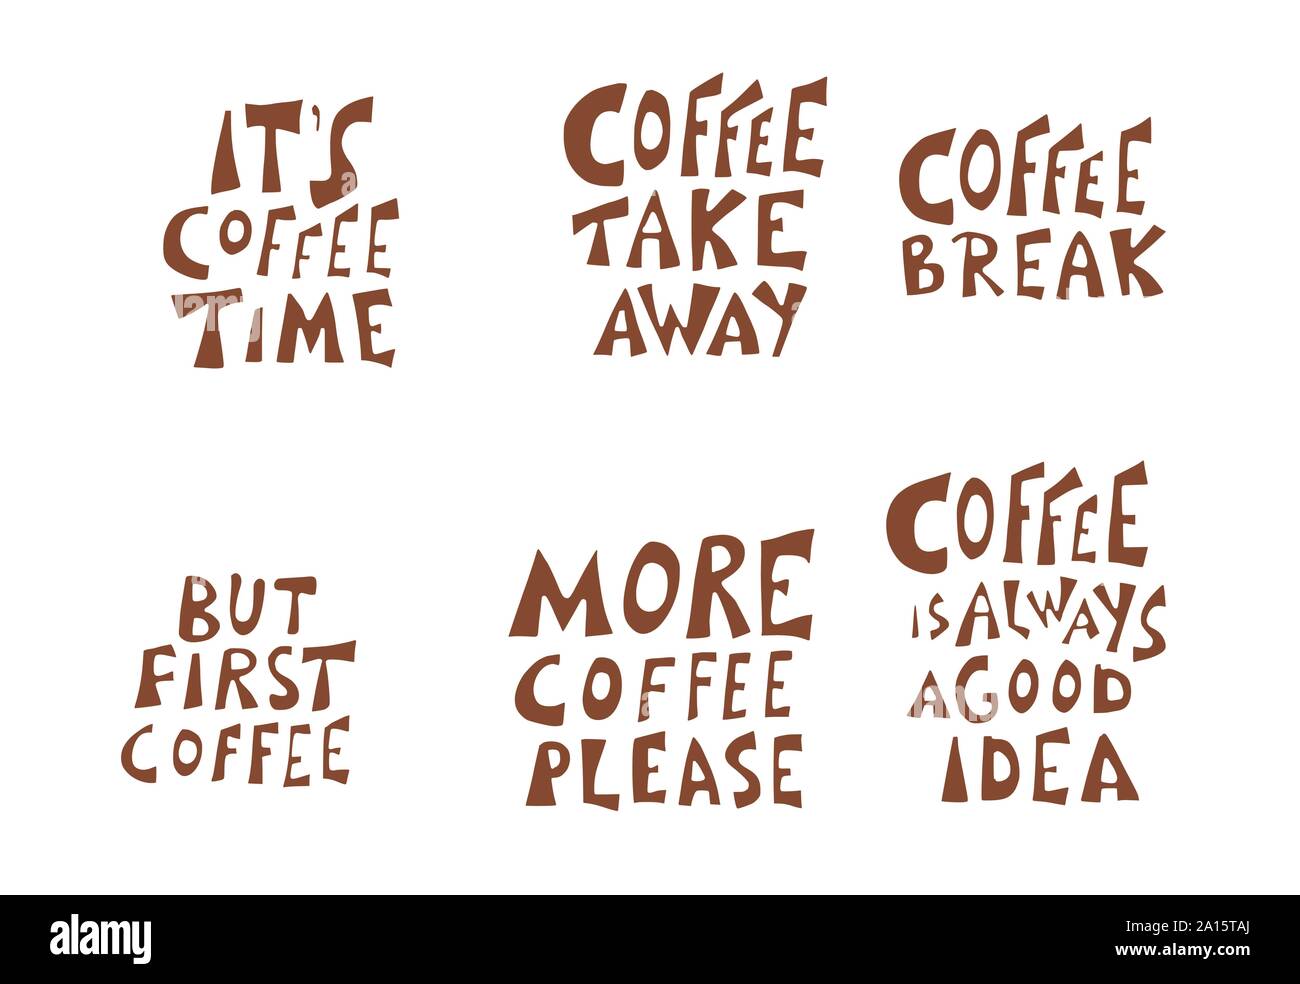 734 Background Coffee Quotes For FREE - MyWeb